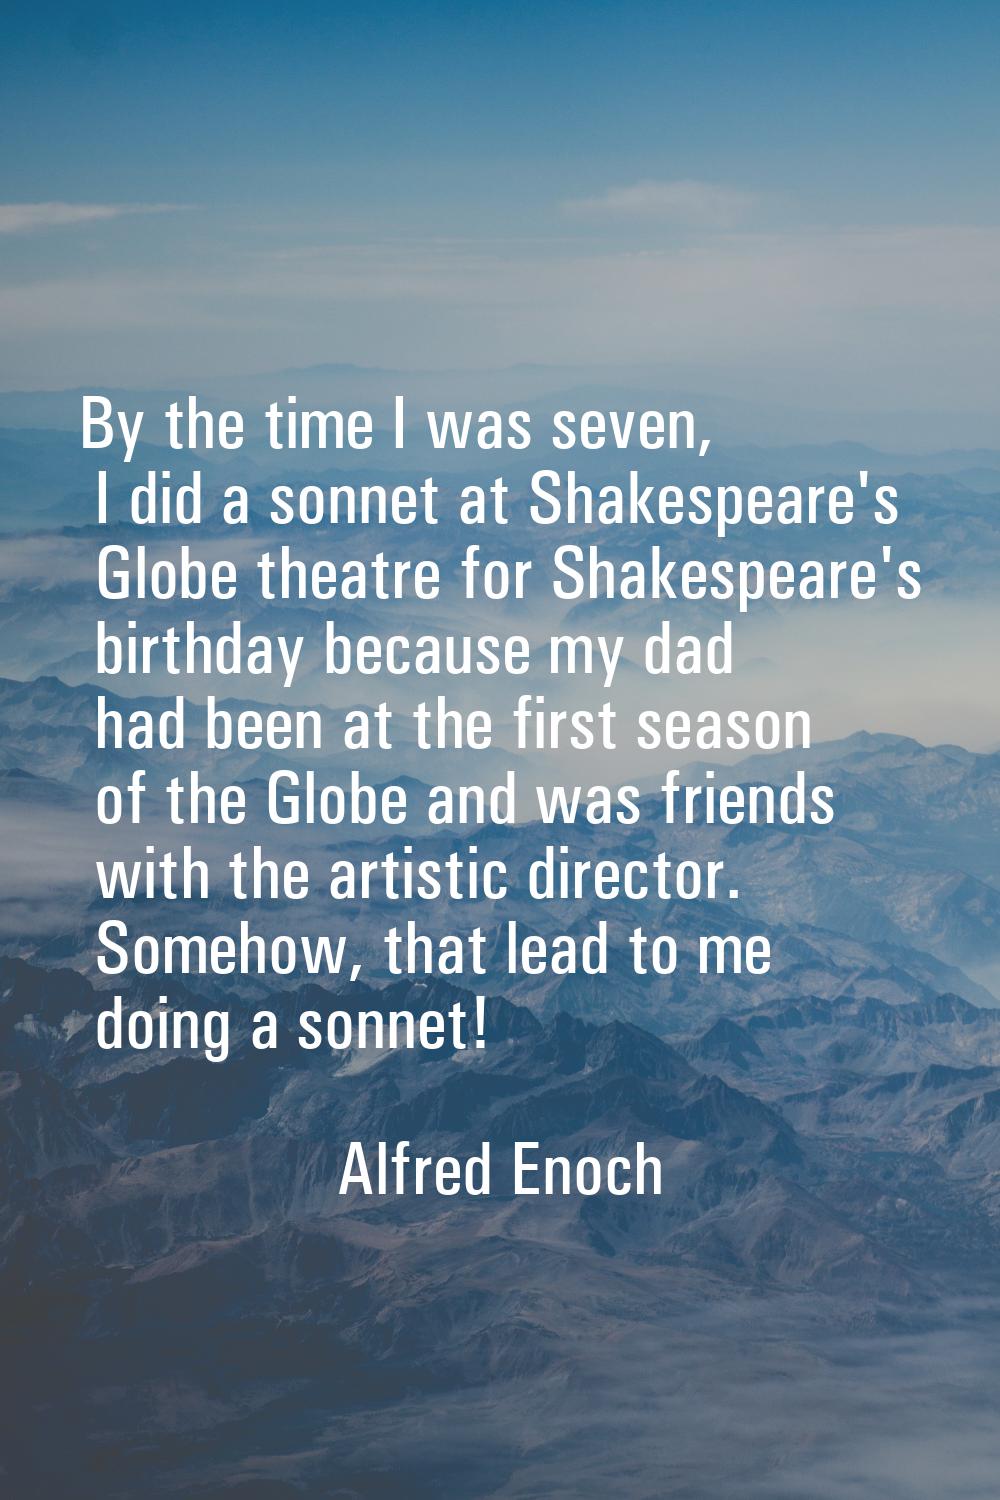 By the time I was seven, I did a sonnet at Shakespeare's Globe theatre for Shakespeare's birthday b